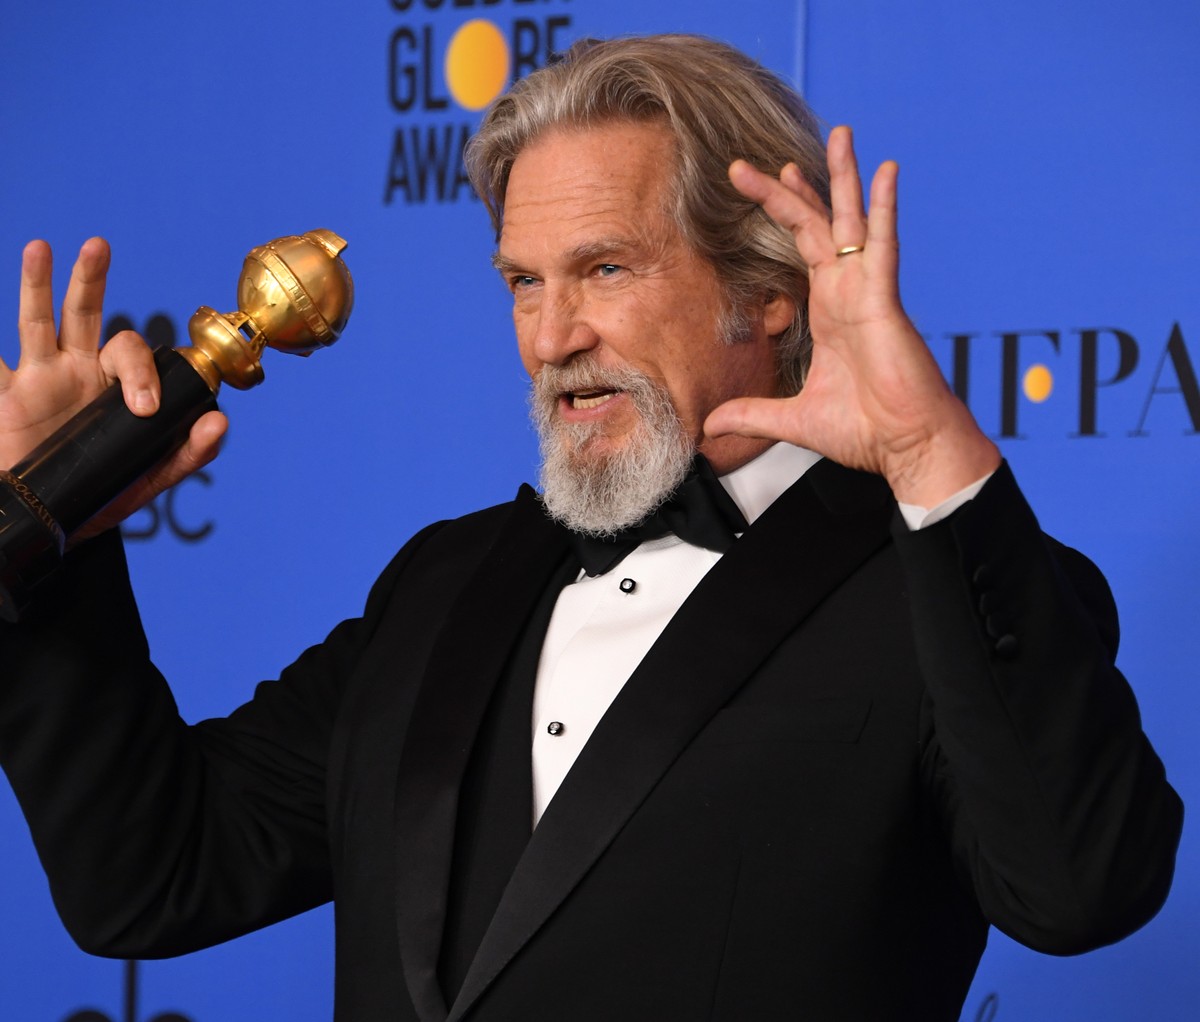 Jeff Bridges reveals he spent five weeks hospitalized after being diagnosed with Covid-19 | Pop & Art